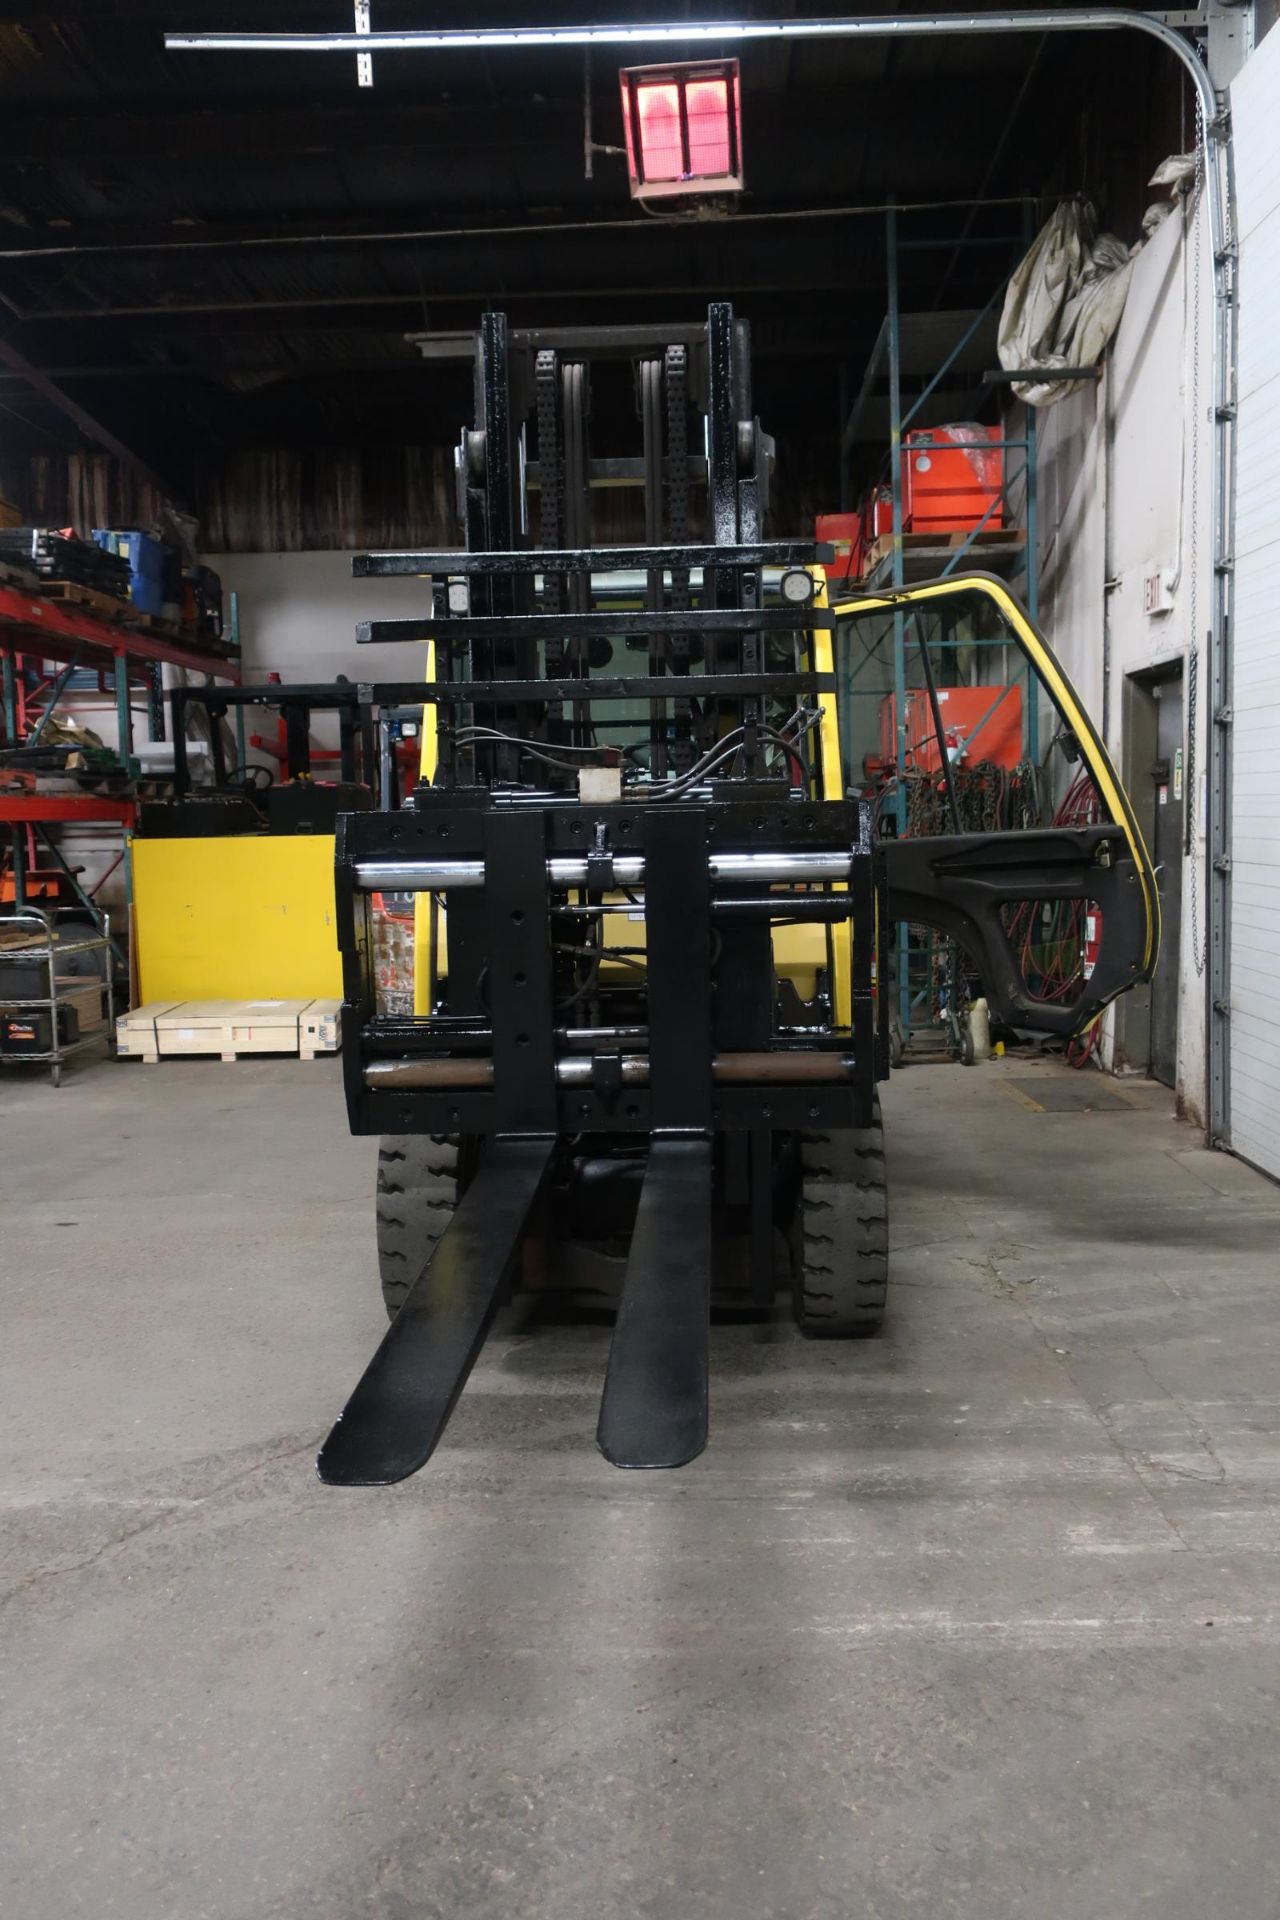 FREE CUSTOMS - 2014 Hyster 10000lbs Capacity OUTDOOR Forklift with 72" forks and fork positioners - Image 2 of 3